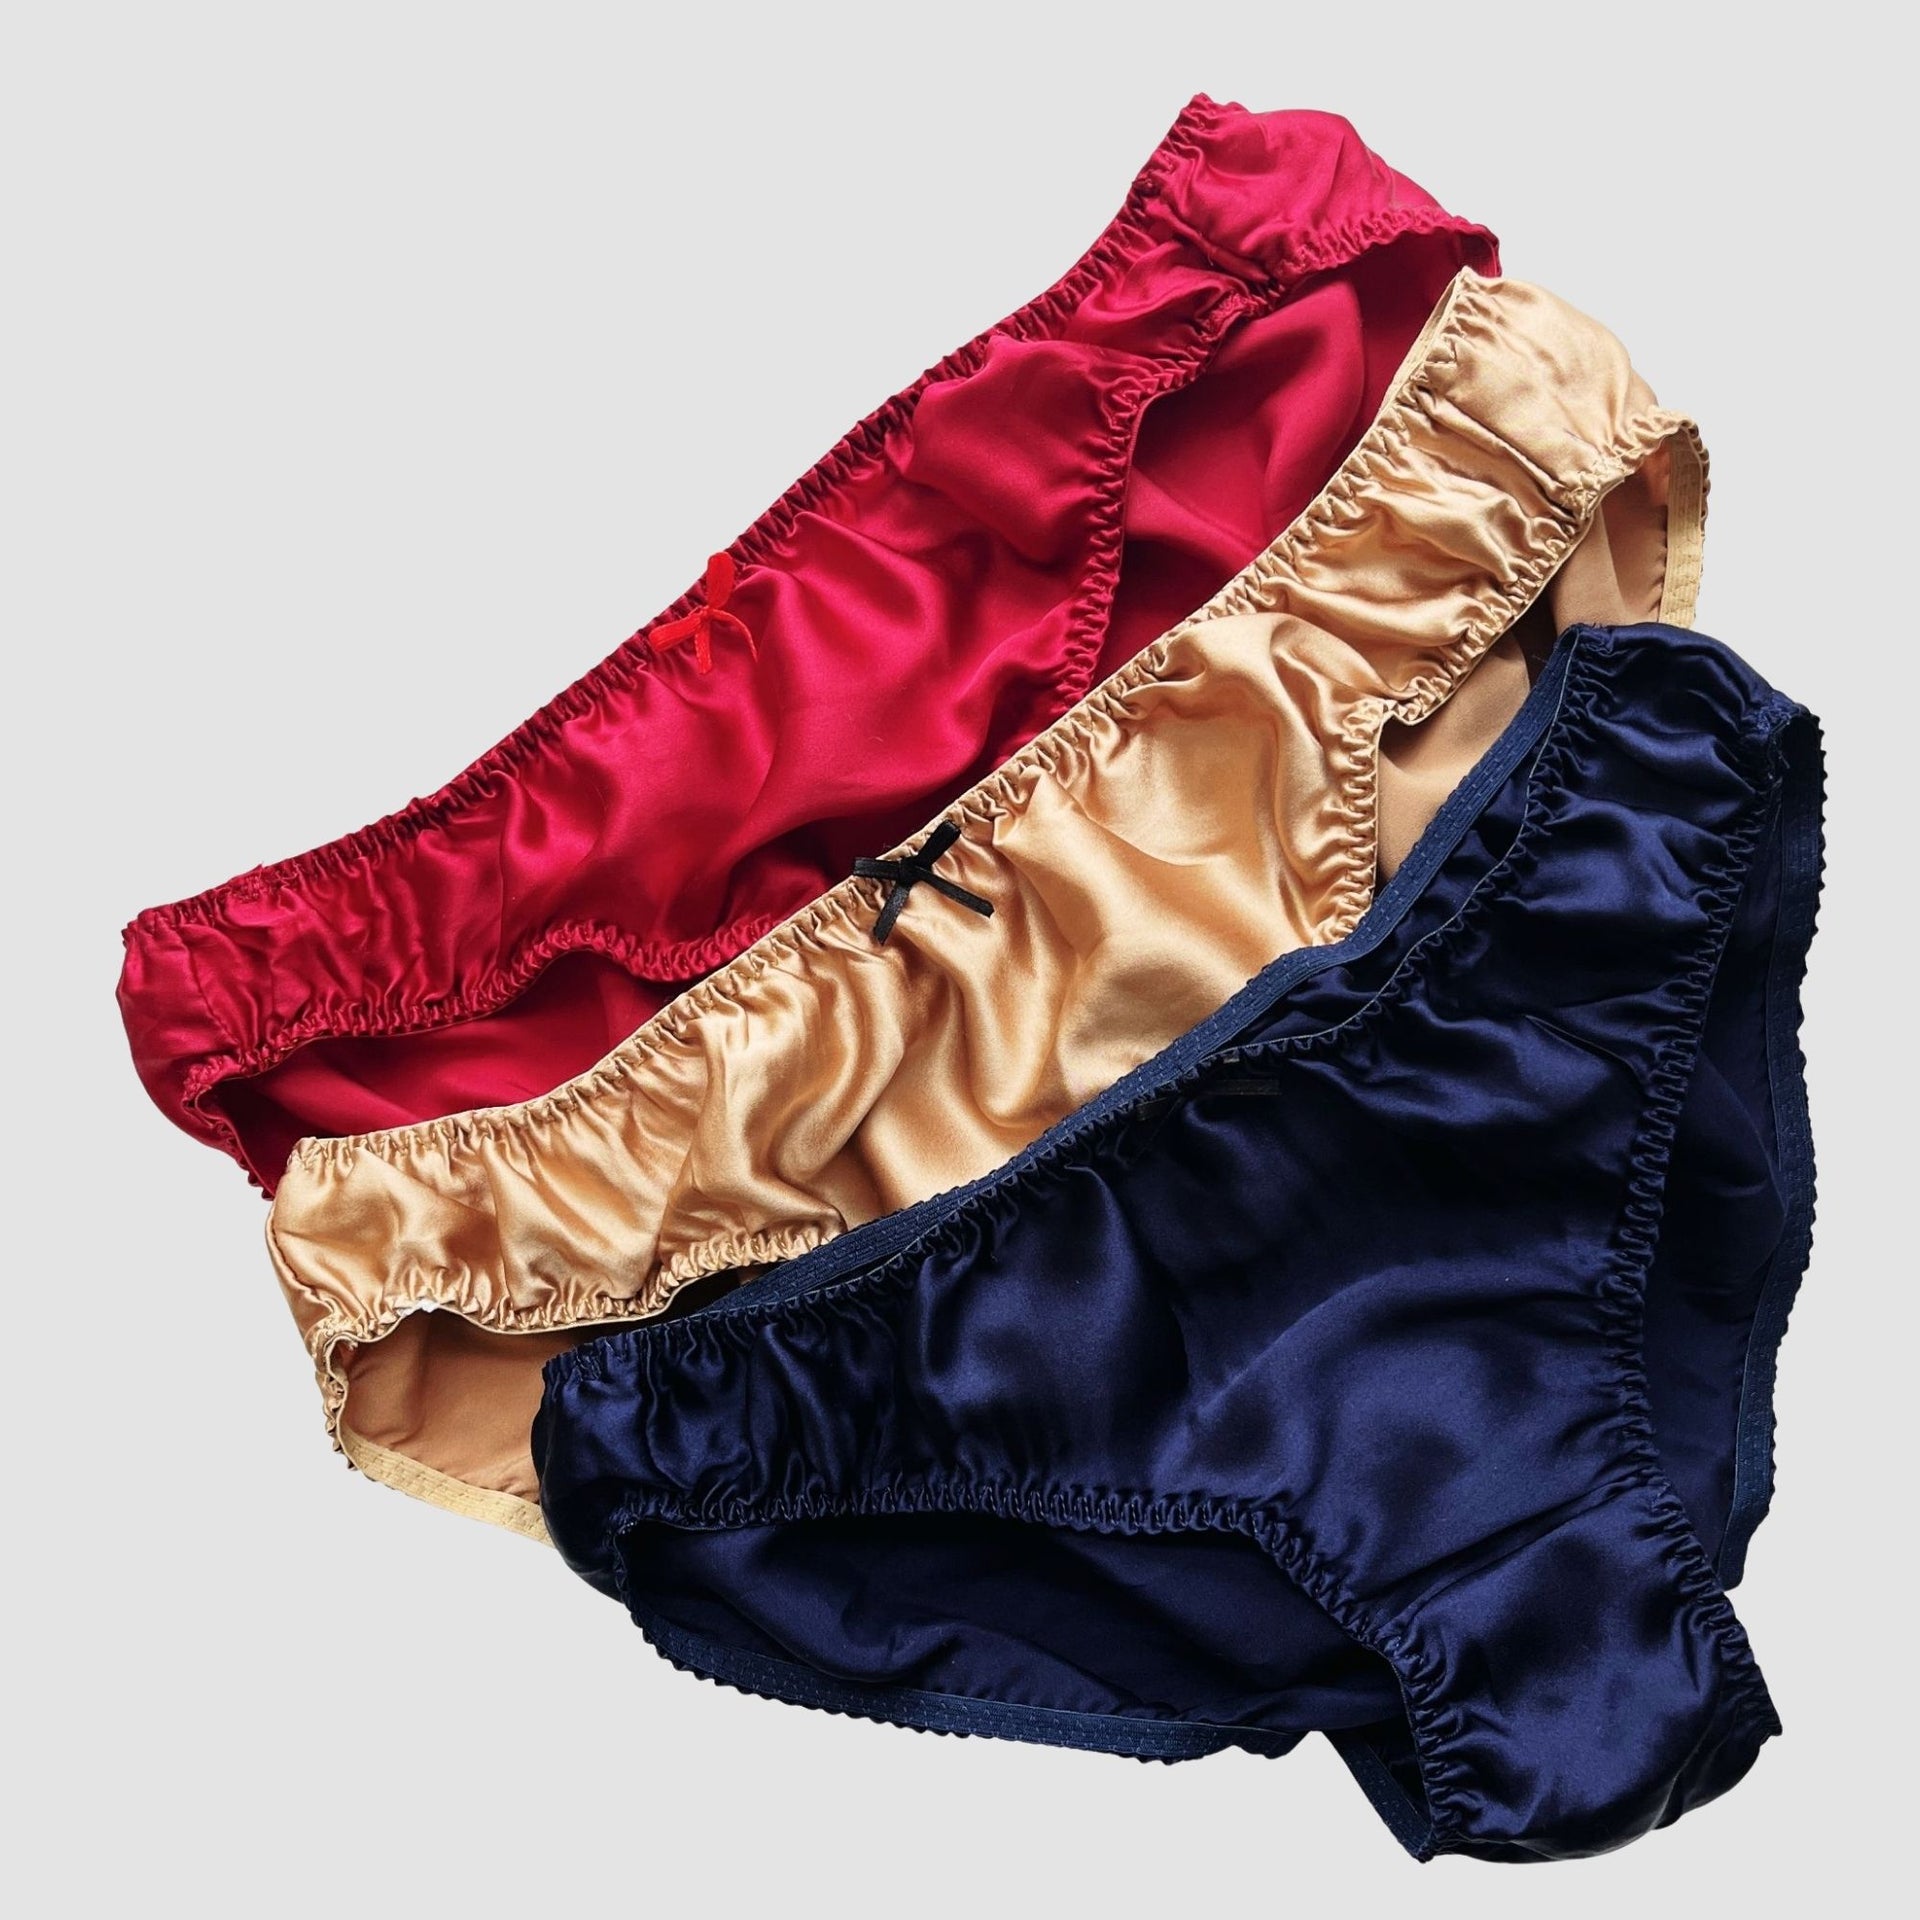 Affordable Luxury Style Shiny Satin Women's Underwear Pure Cotton